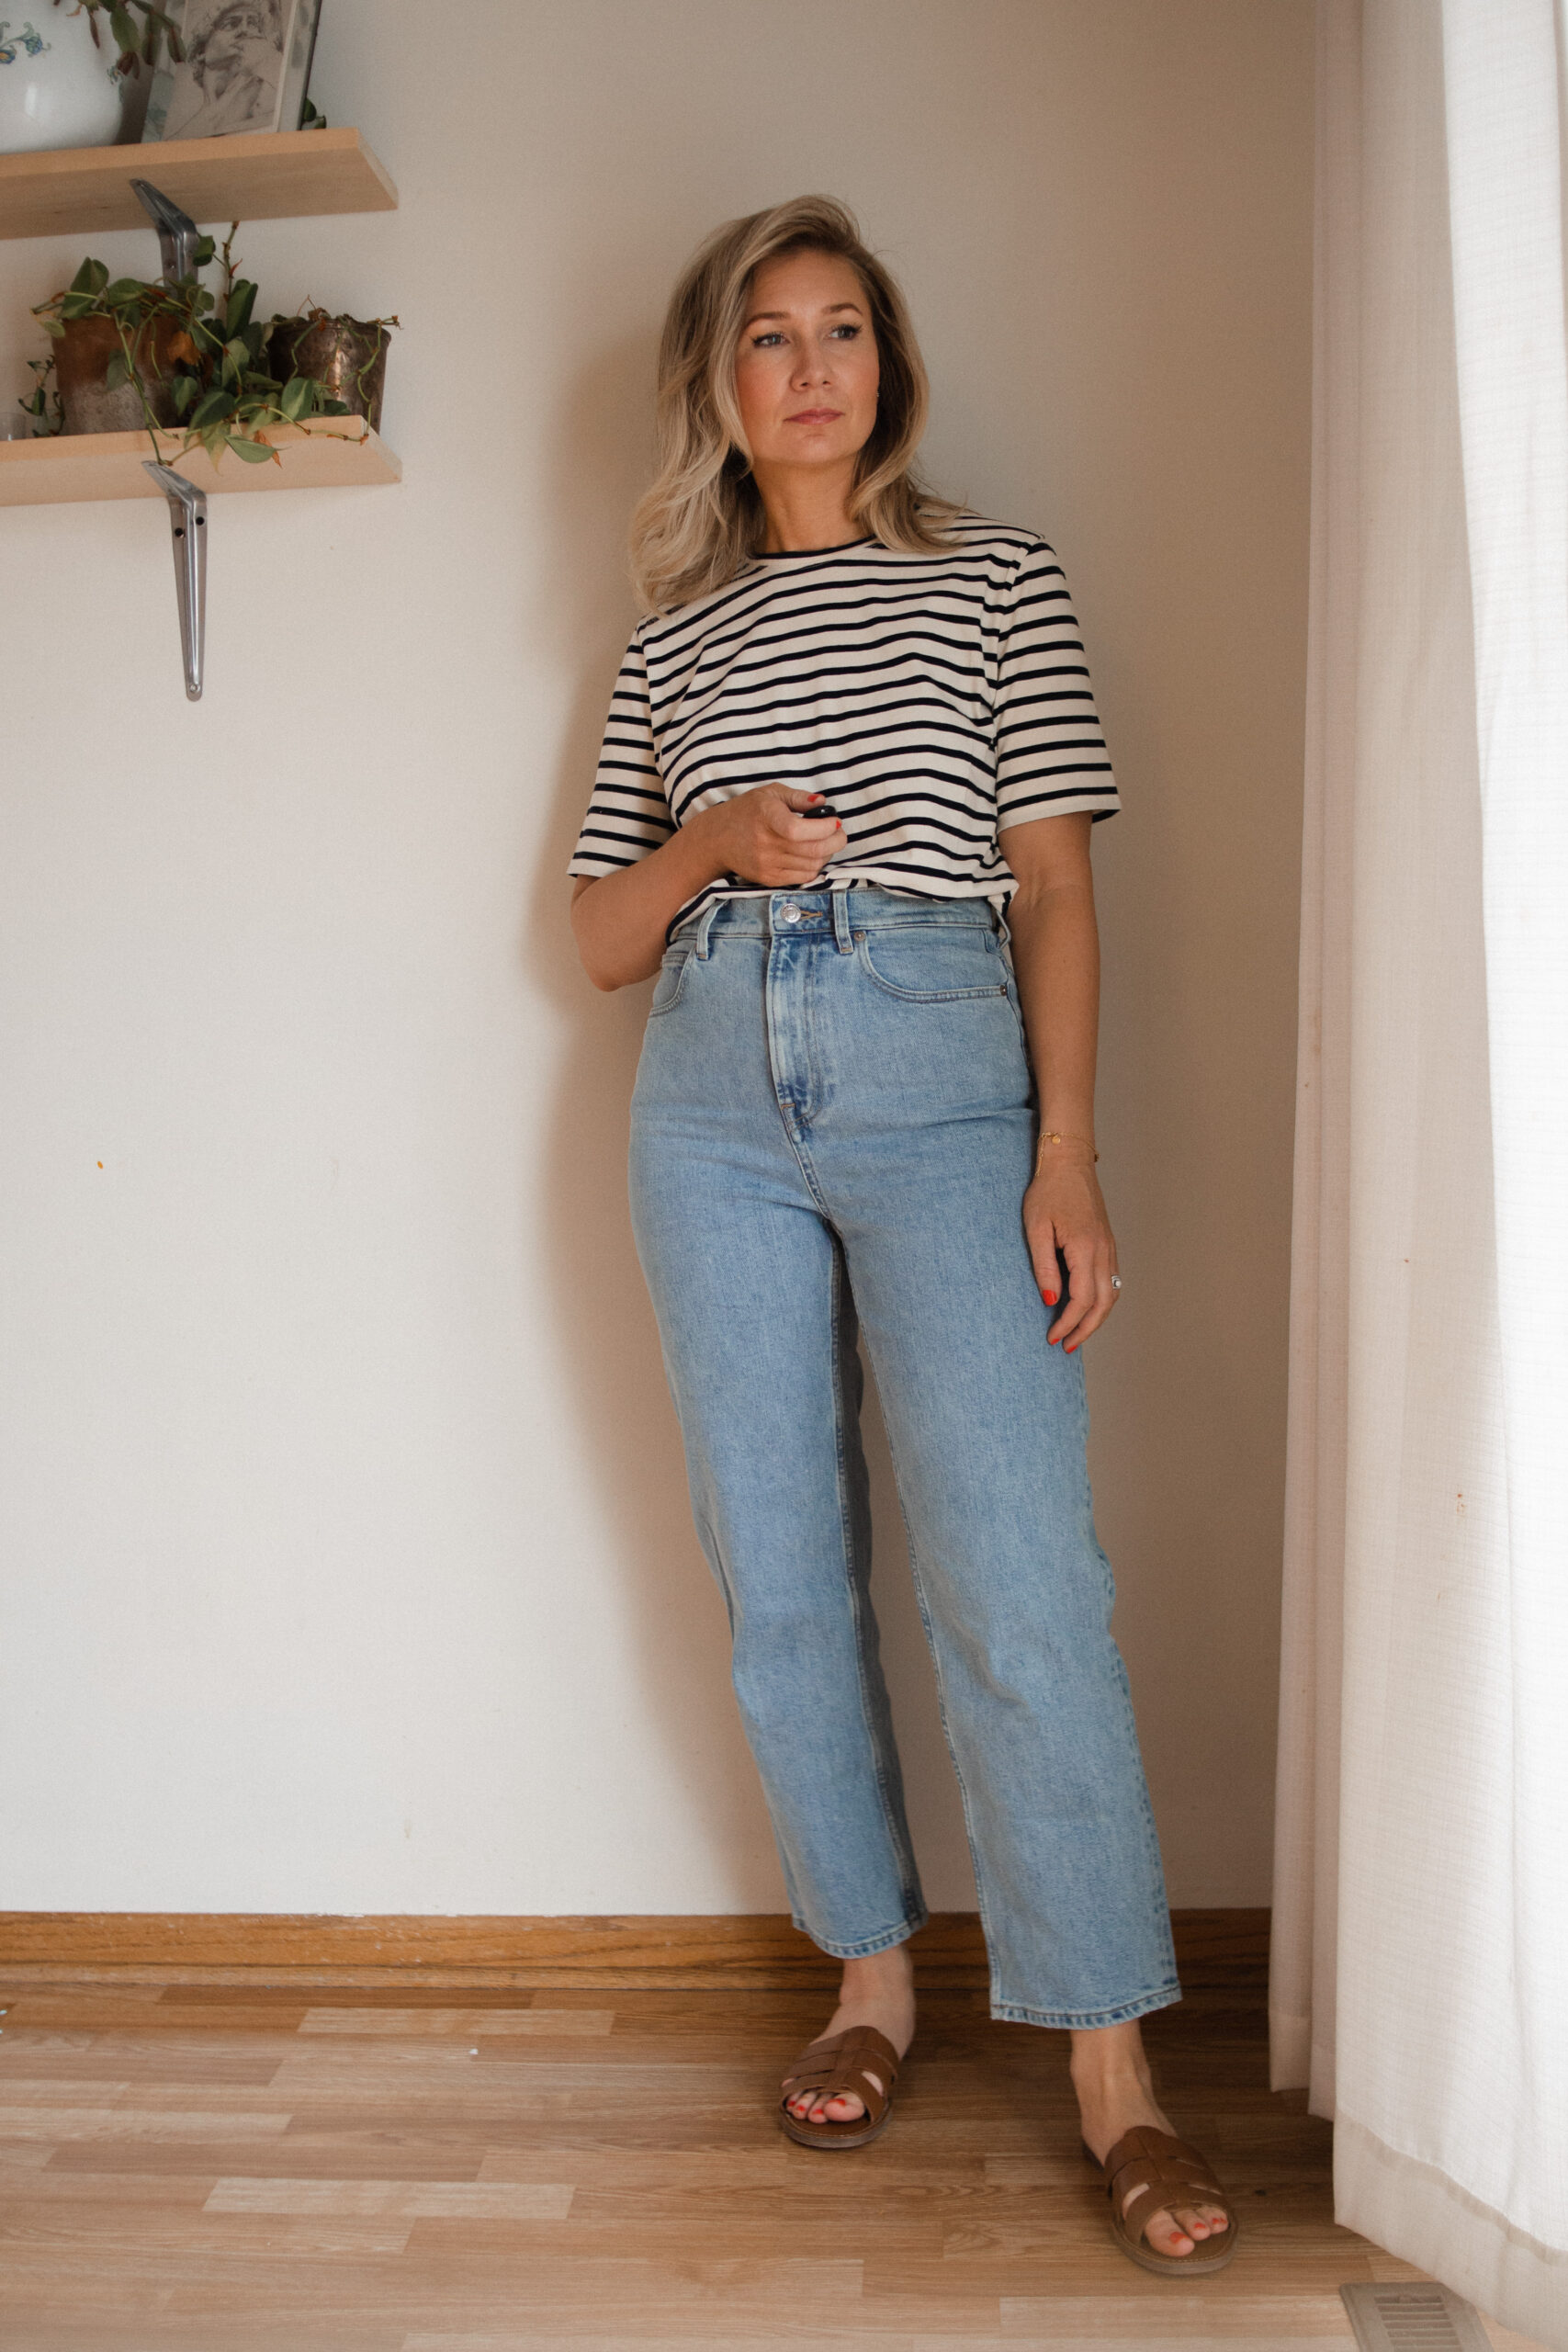 Karin Emily wears a black and white striped tee, the everlane rigid way high jeans and a pair of brown sandals for her Everlane Denim Guide